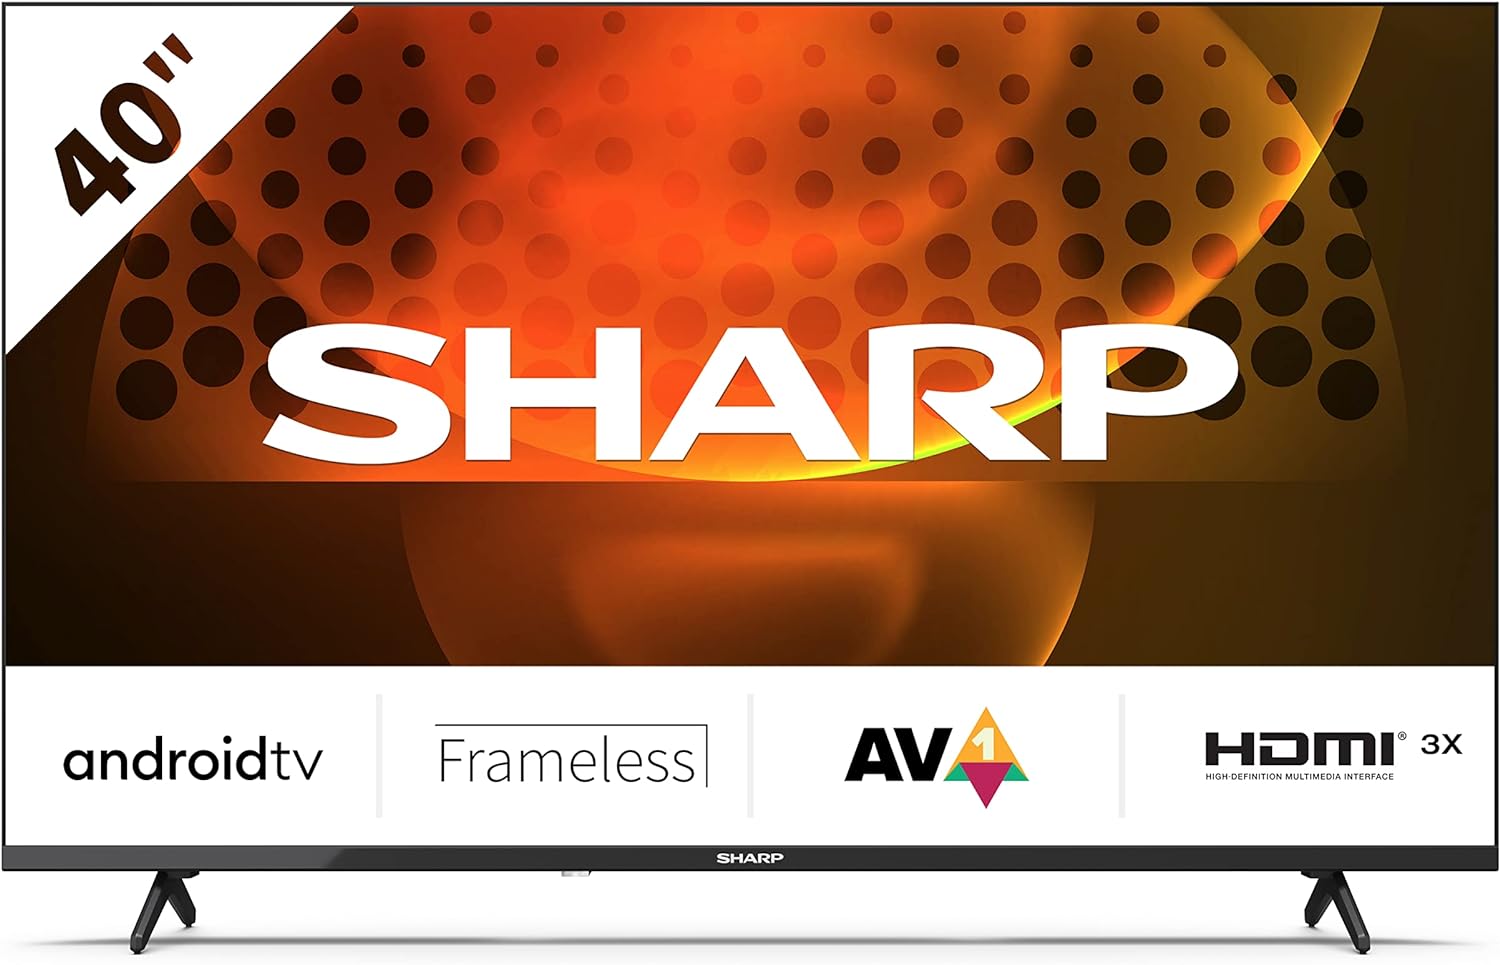 SHARP 4T - C50FL6KL2AB 50 Inch Smart TV 4K LED TV Unit with Google Assistant Hub, Freeview Play & Chromecast Device Built In, Android TV, UHD Frameless Television, 3x HDMI & 2x USB Bluetooth TV – Black - Amazing Gadgets Outlet